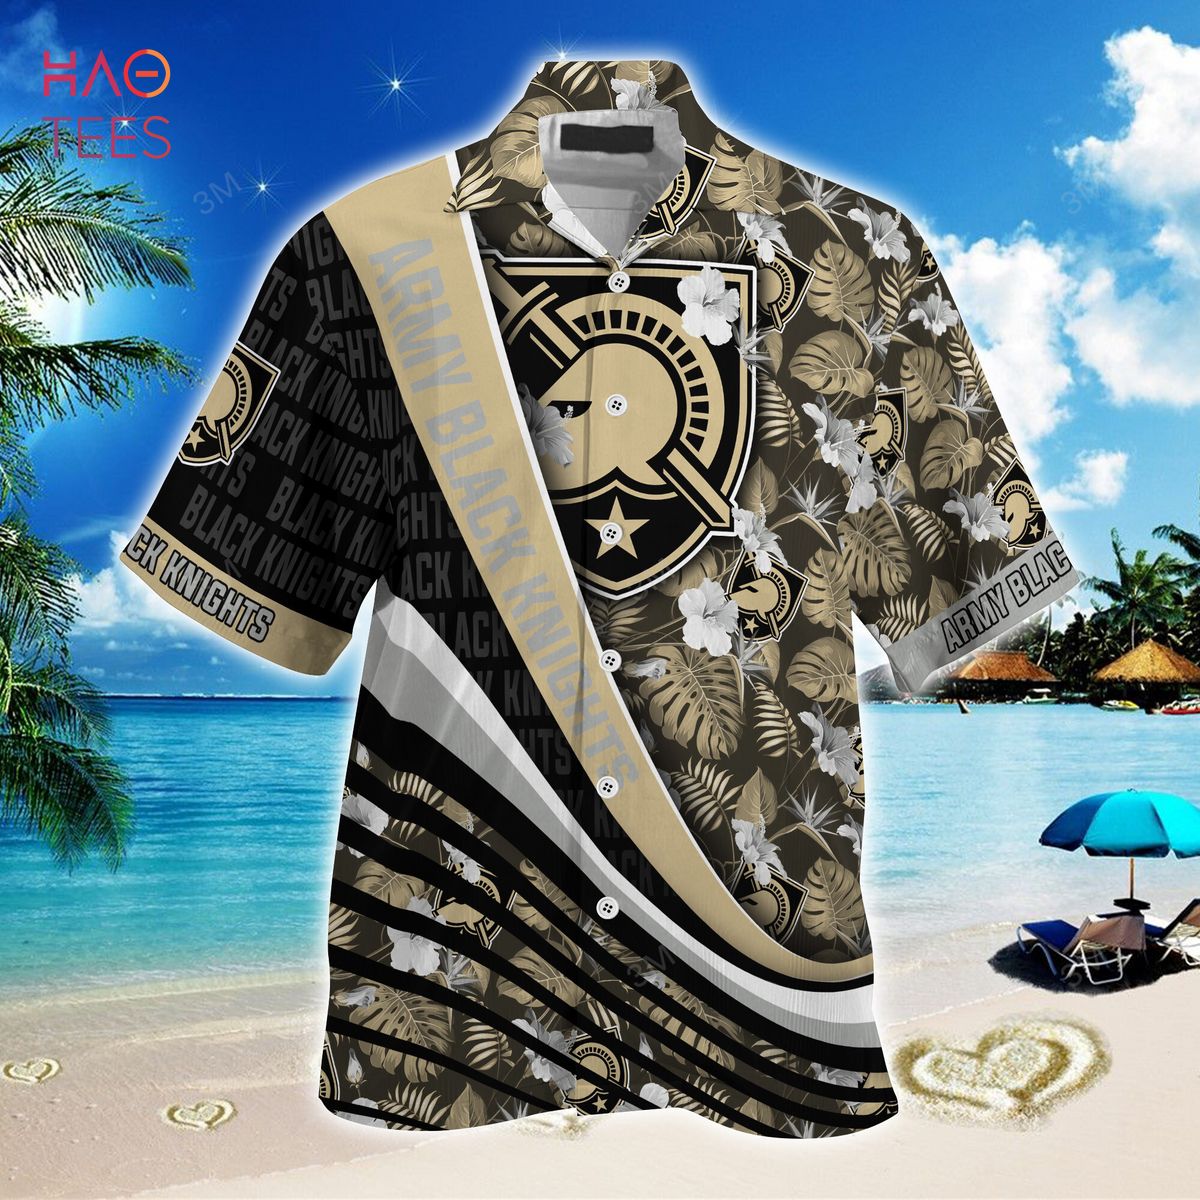 [TRENDING] Army Black Knights Summer Hawaiian Shirt, With Tropical Flower Pattern For Fans